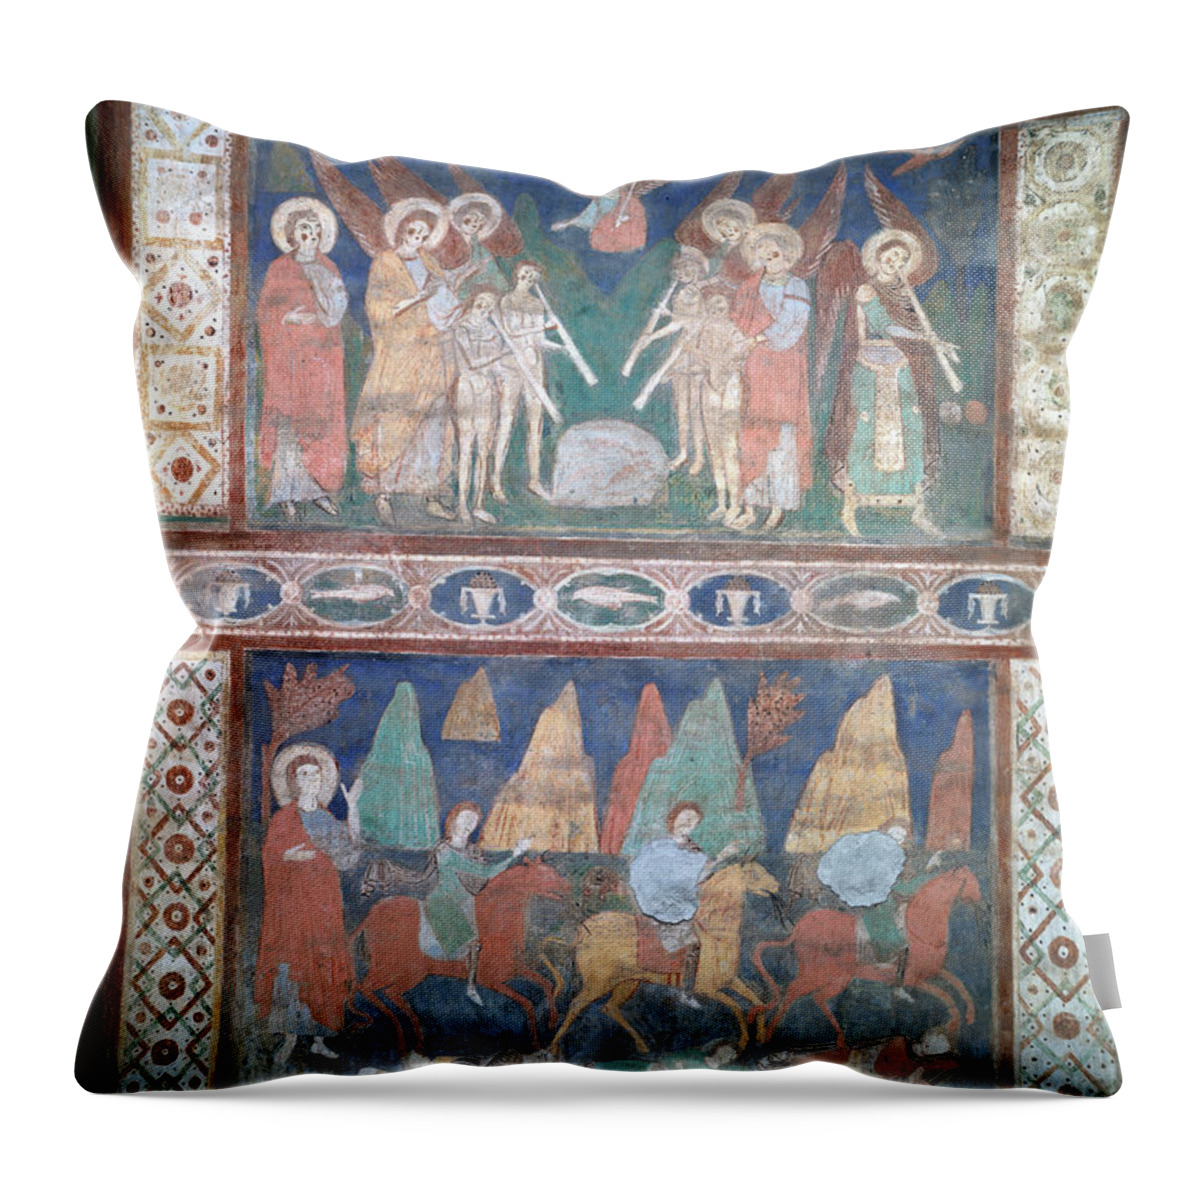 Byzantine Influence Throw Pillow featuring the painting Musical Angels And The Flight Into Egypt by Giovanni And Stefano